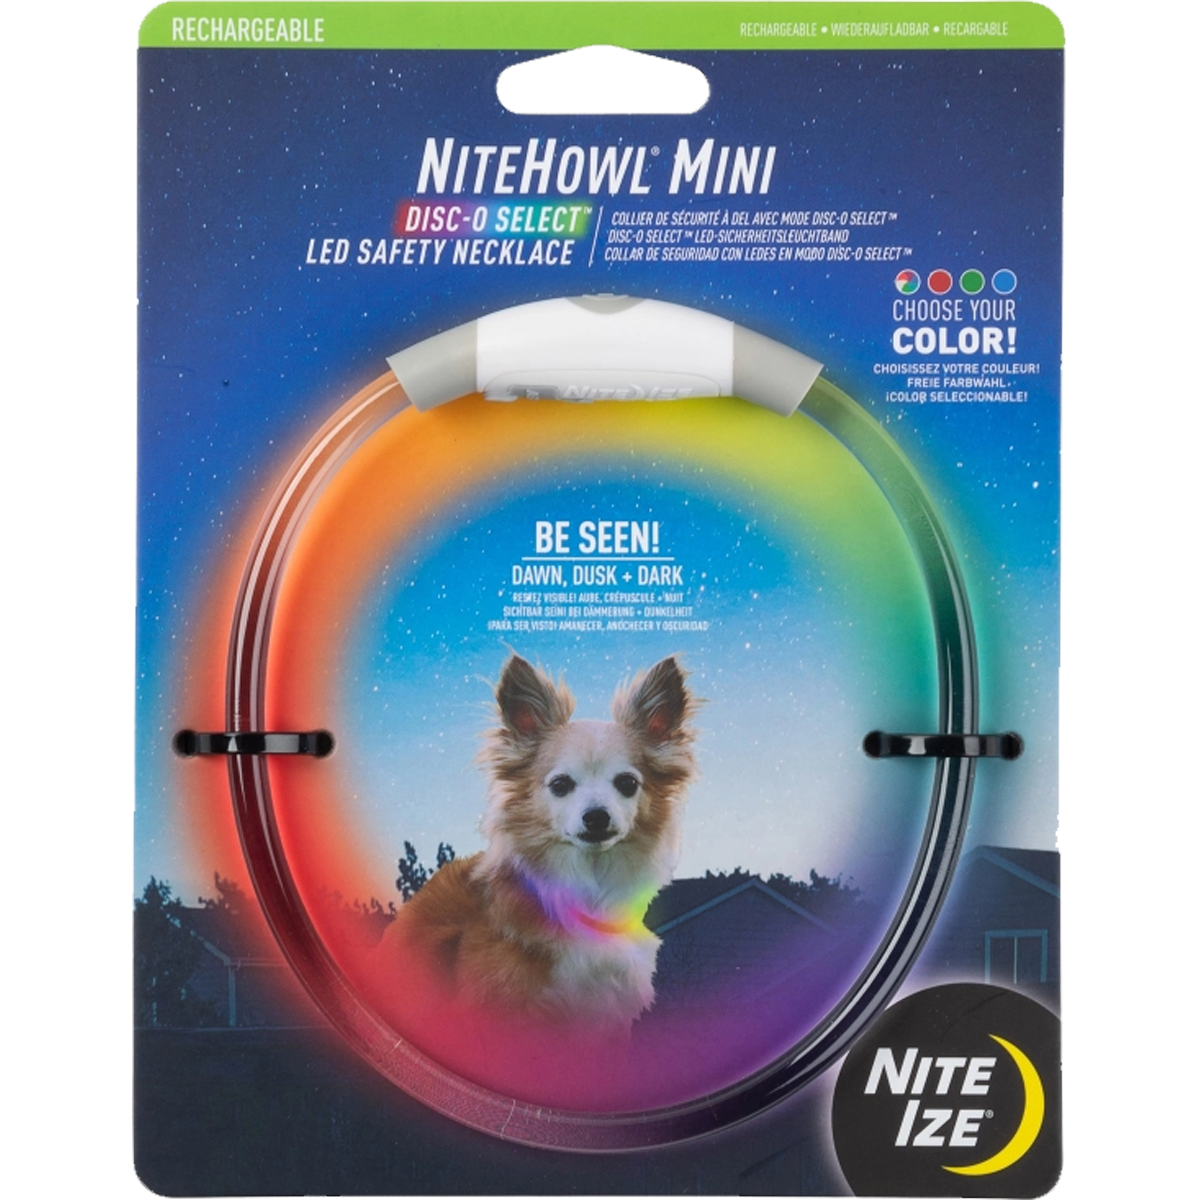 NiteHowl Mini Rechargeable LED Safety Necklace alternate view